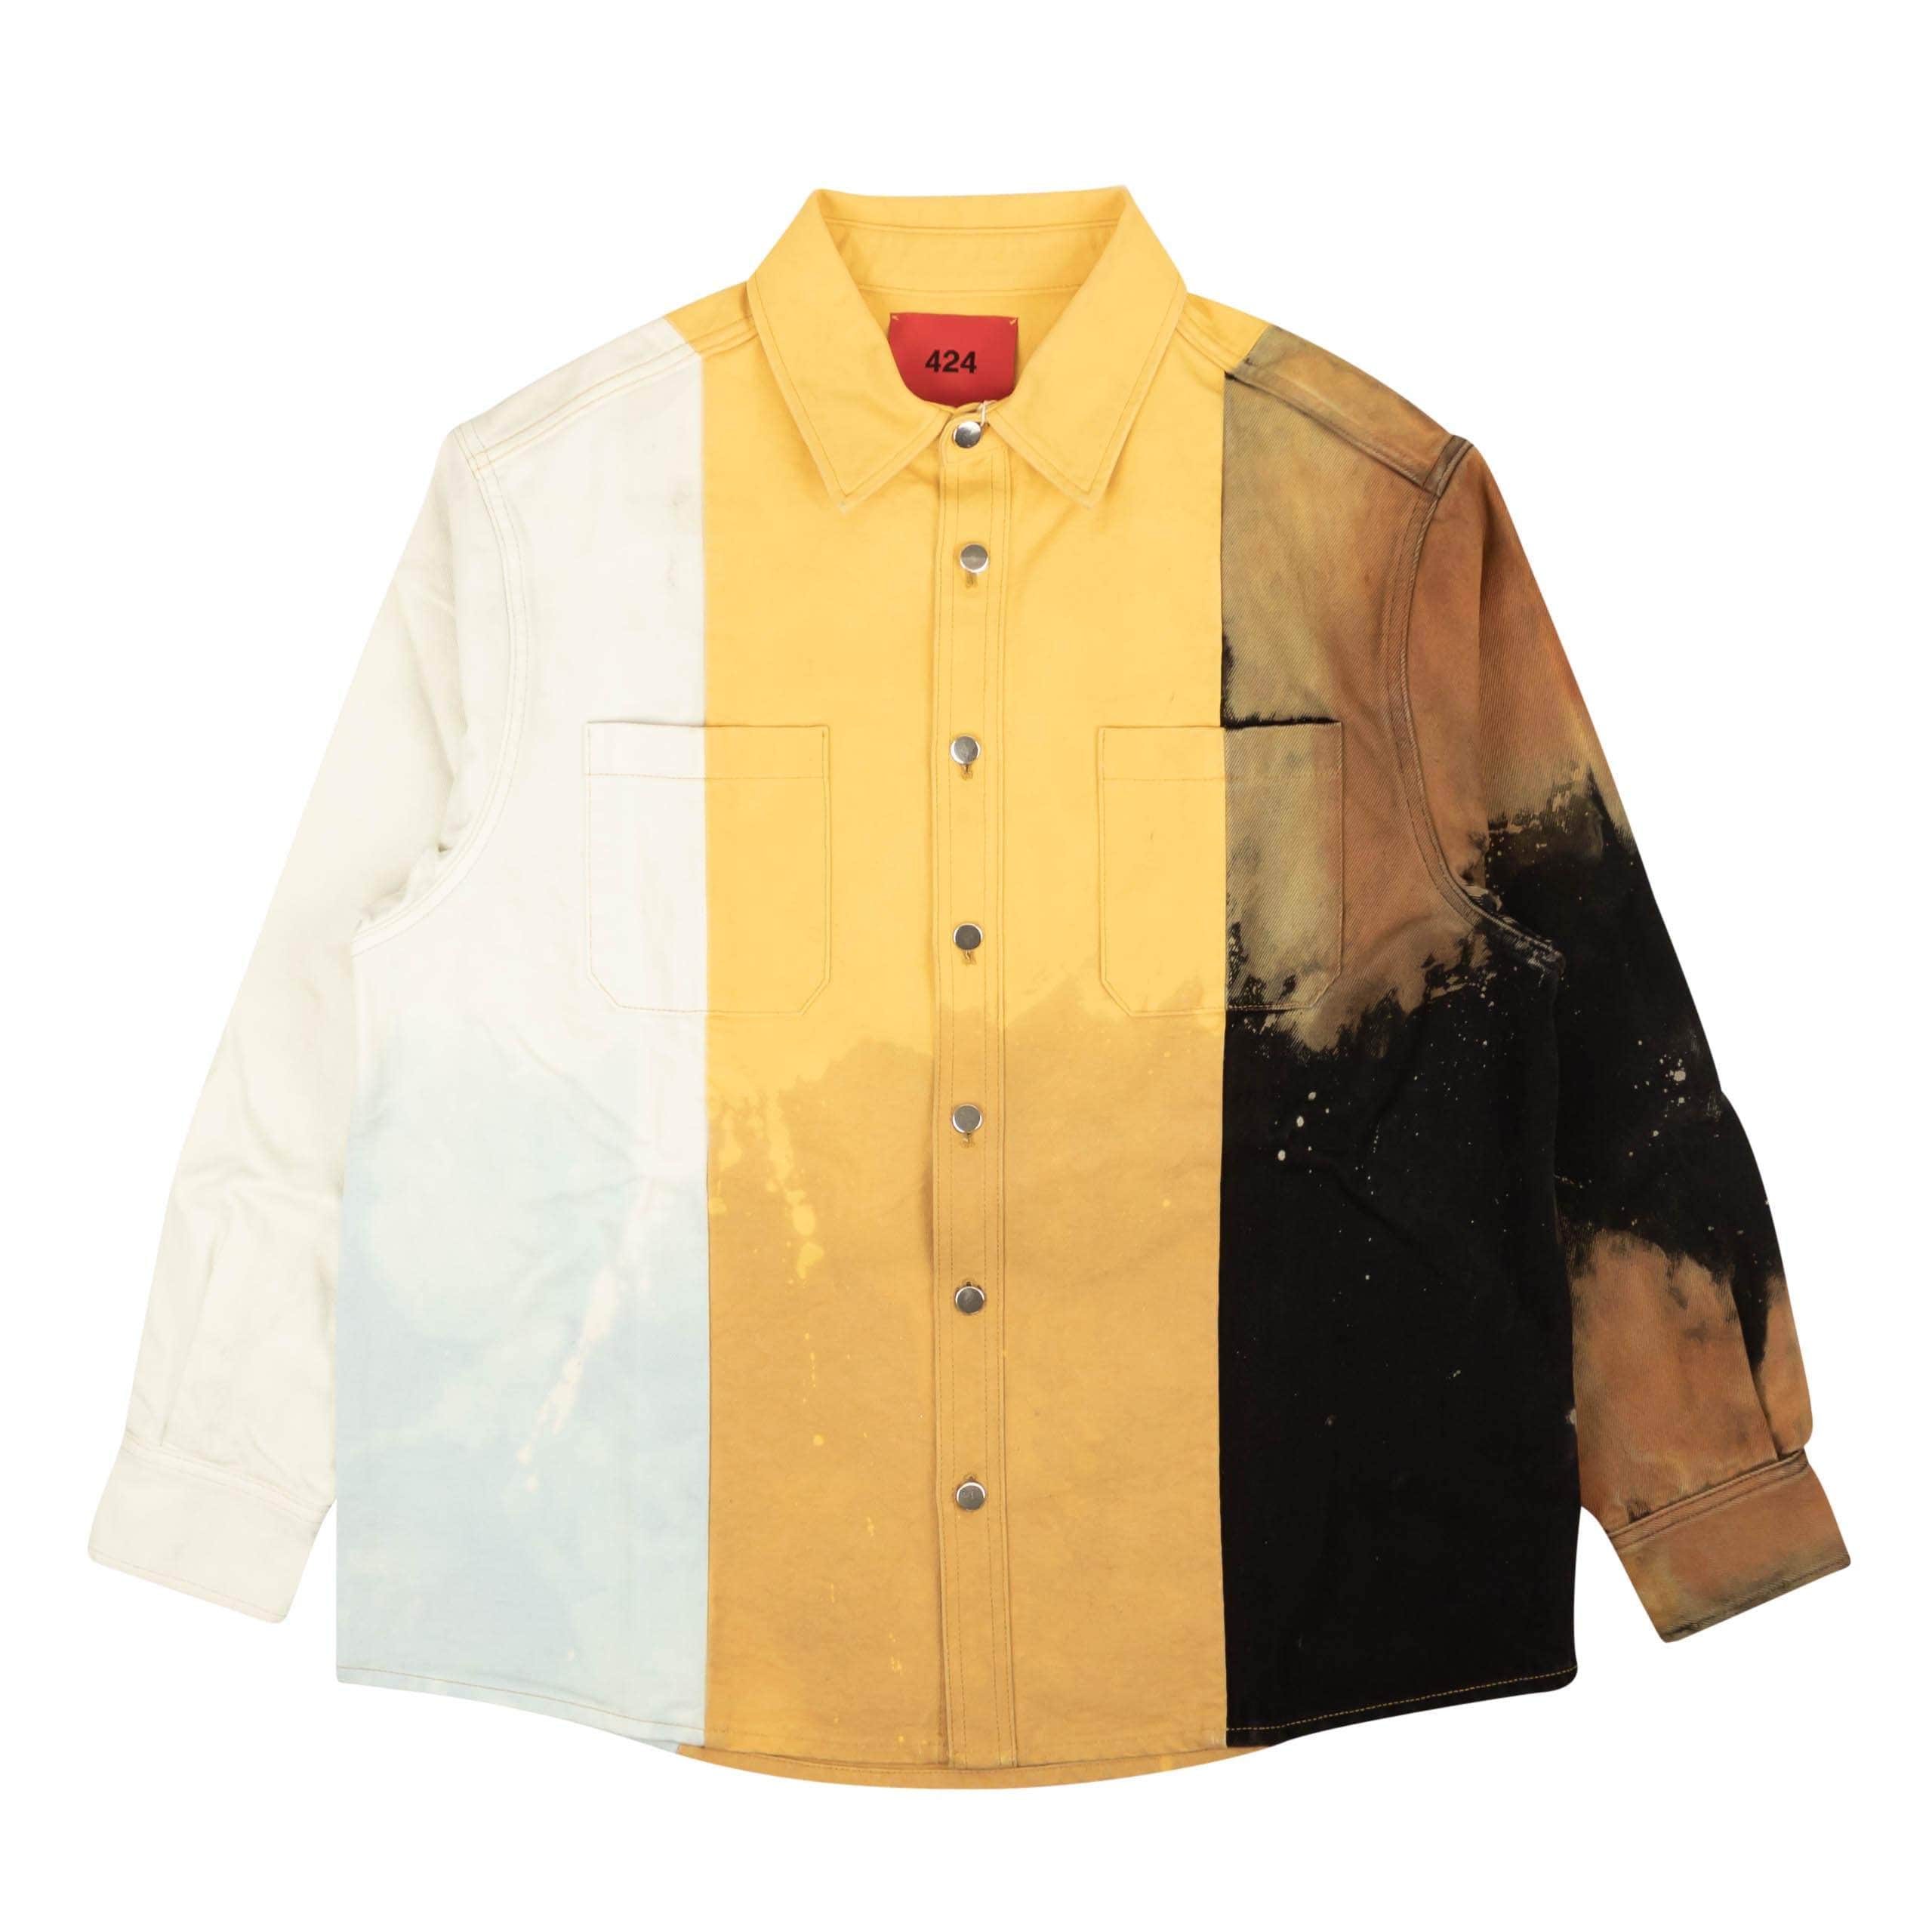 424 ON FAIRFAX 250-500, 424-on-fairfax, channelenable-all, chicmi, couponcollection, gender-mens, main-clothing, mens-shoes, size-m, size-s, size-xs Multi Colorblock Denim BUtton Down Shirt